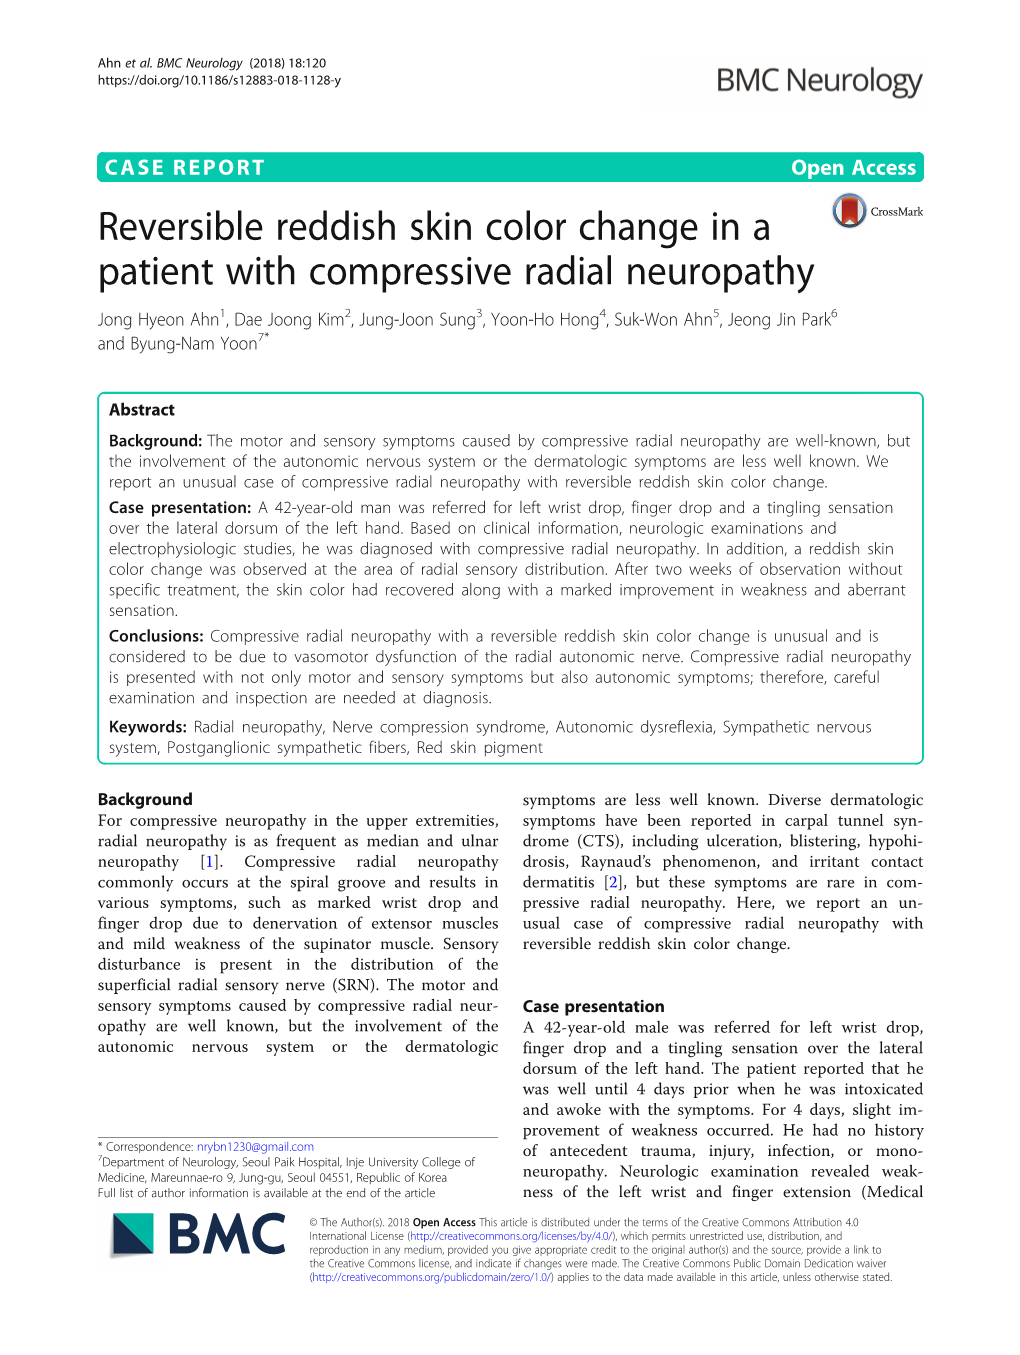 Reversible Reddish Skin Color Change in a Patient with Compressive Radial